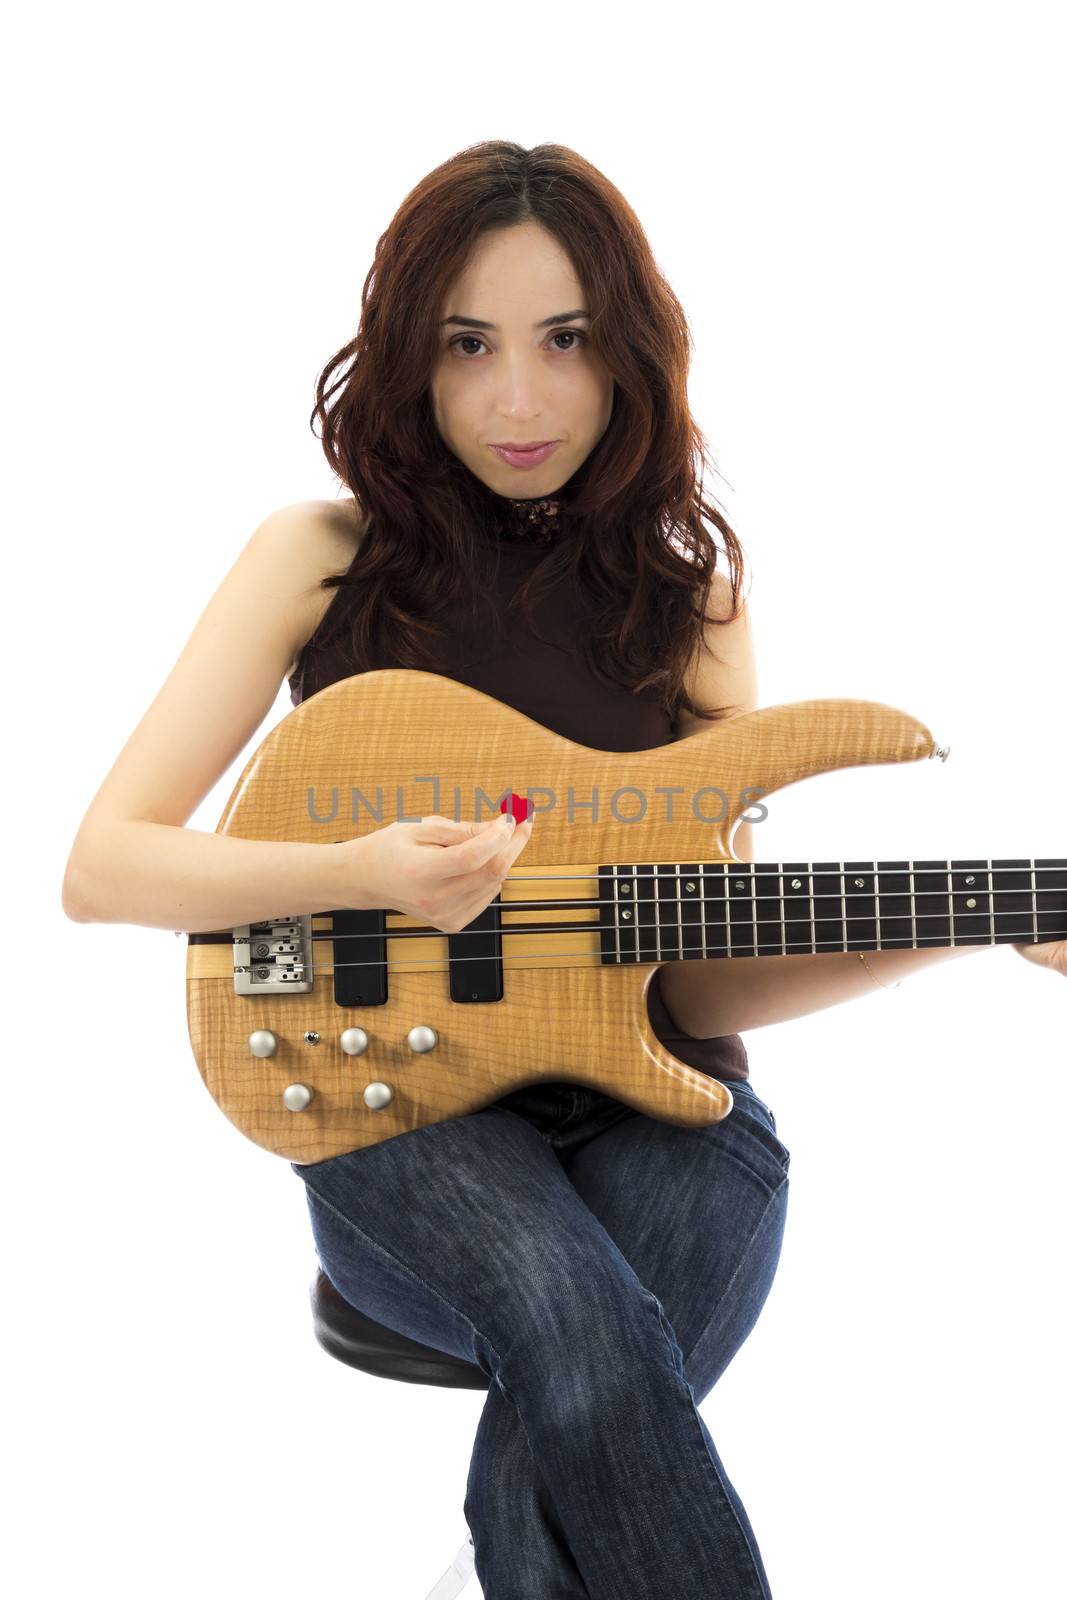 Young woman playing a bass guitar (Series with the same model available)